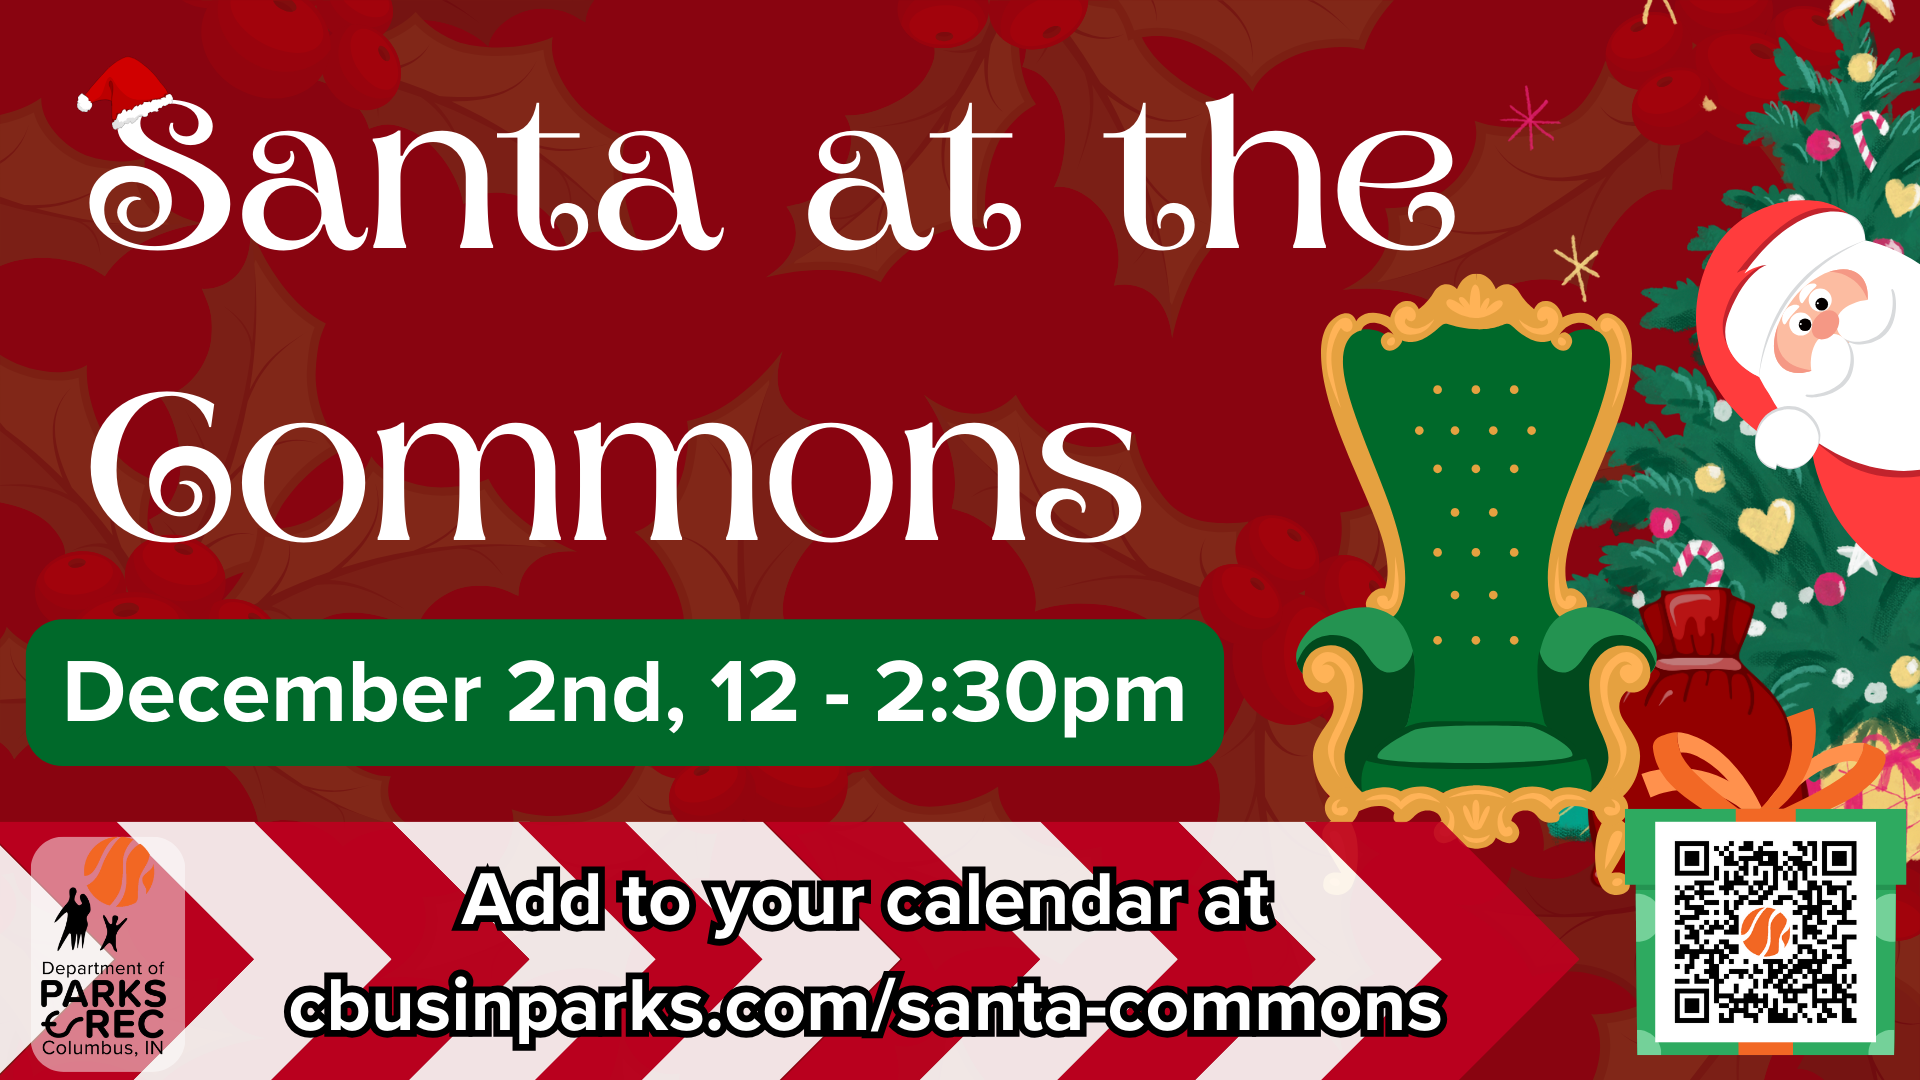 Santa at the Commons: December 2nd, 12-2pm. Add to your calendar at cbusinparks.com/santa-commons